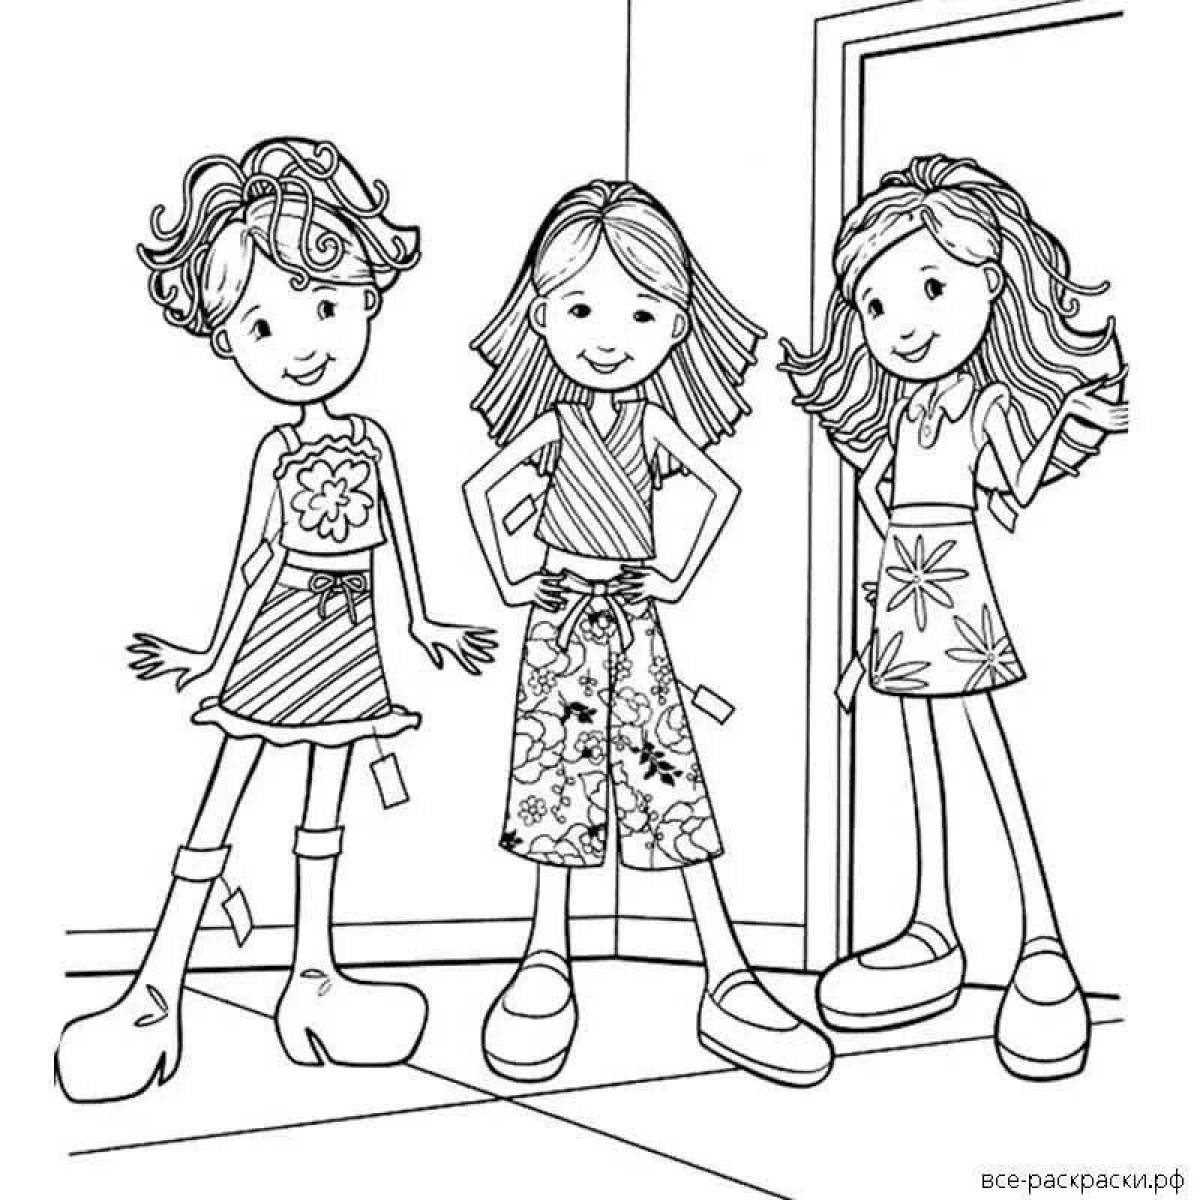 Grand coloring page include others